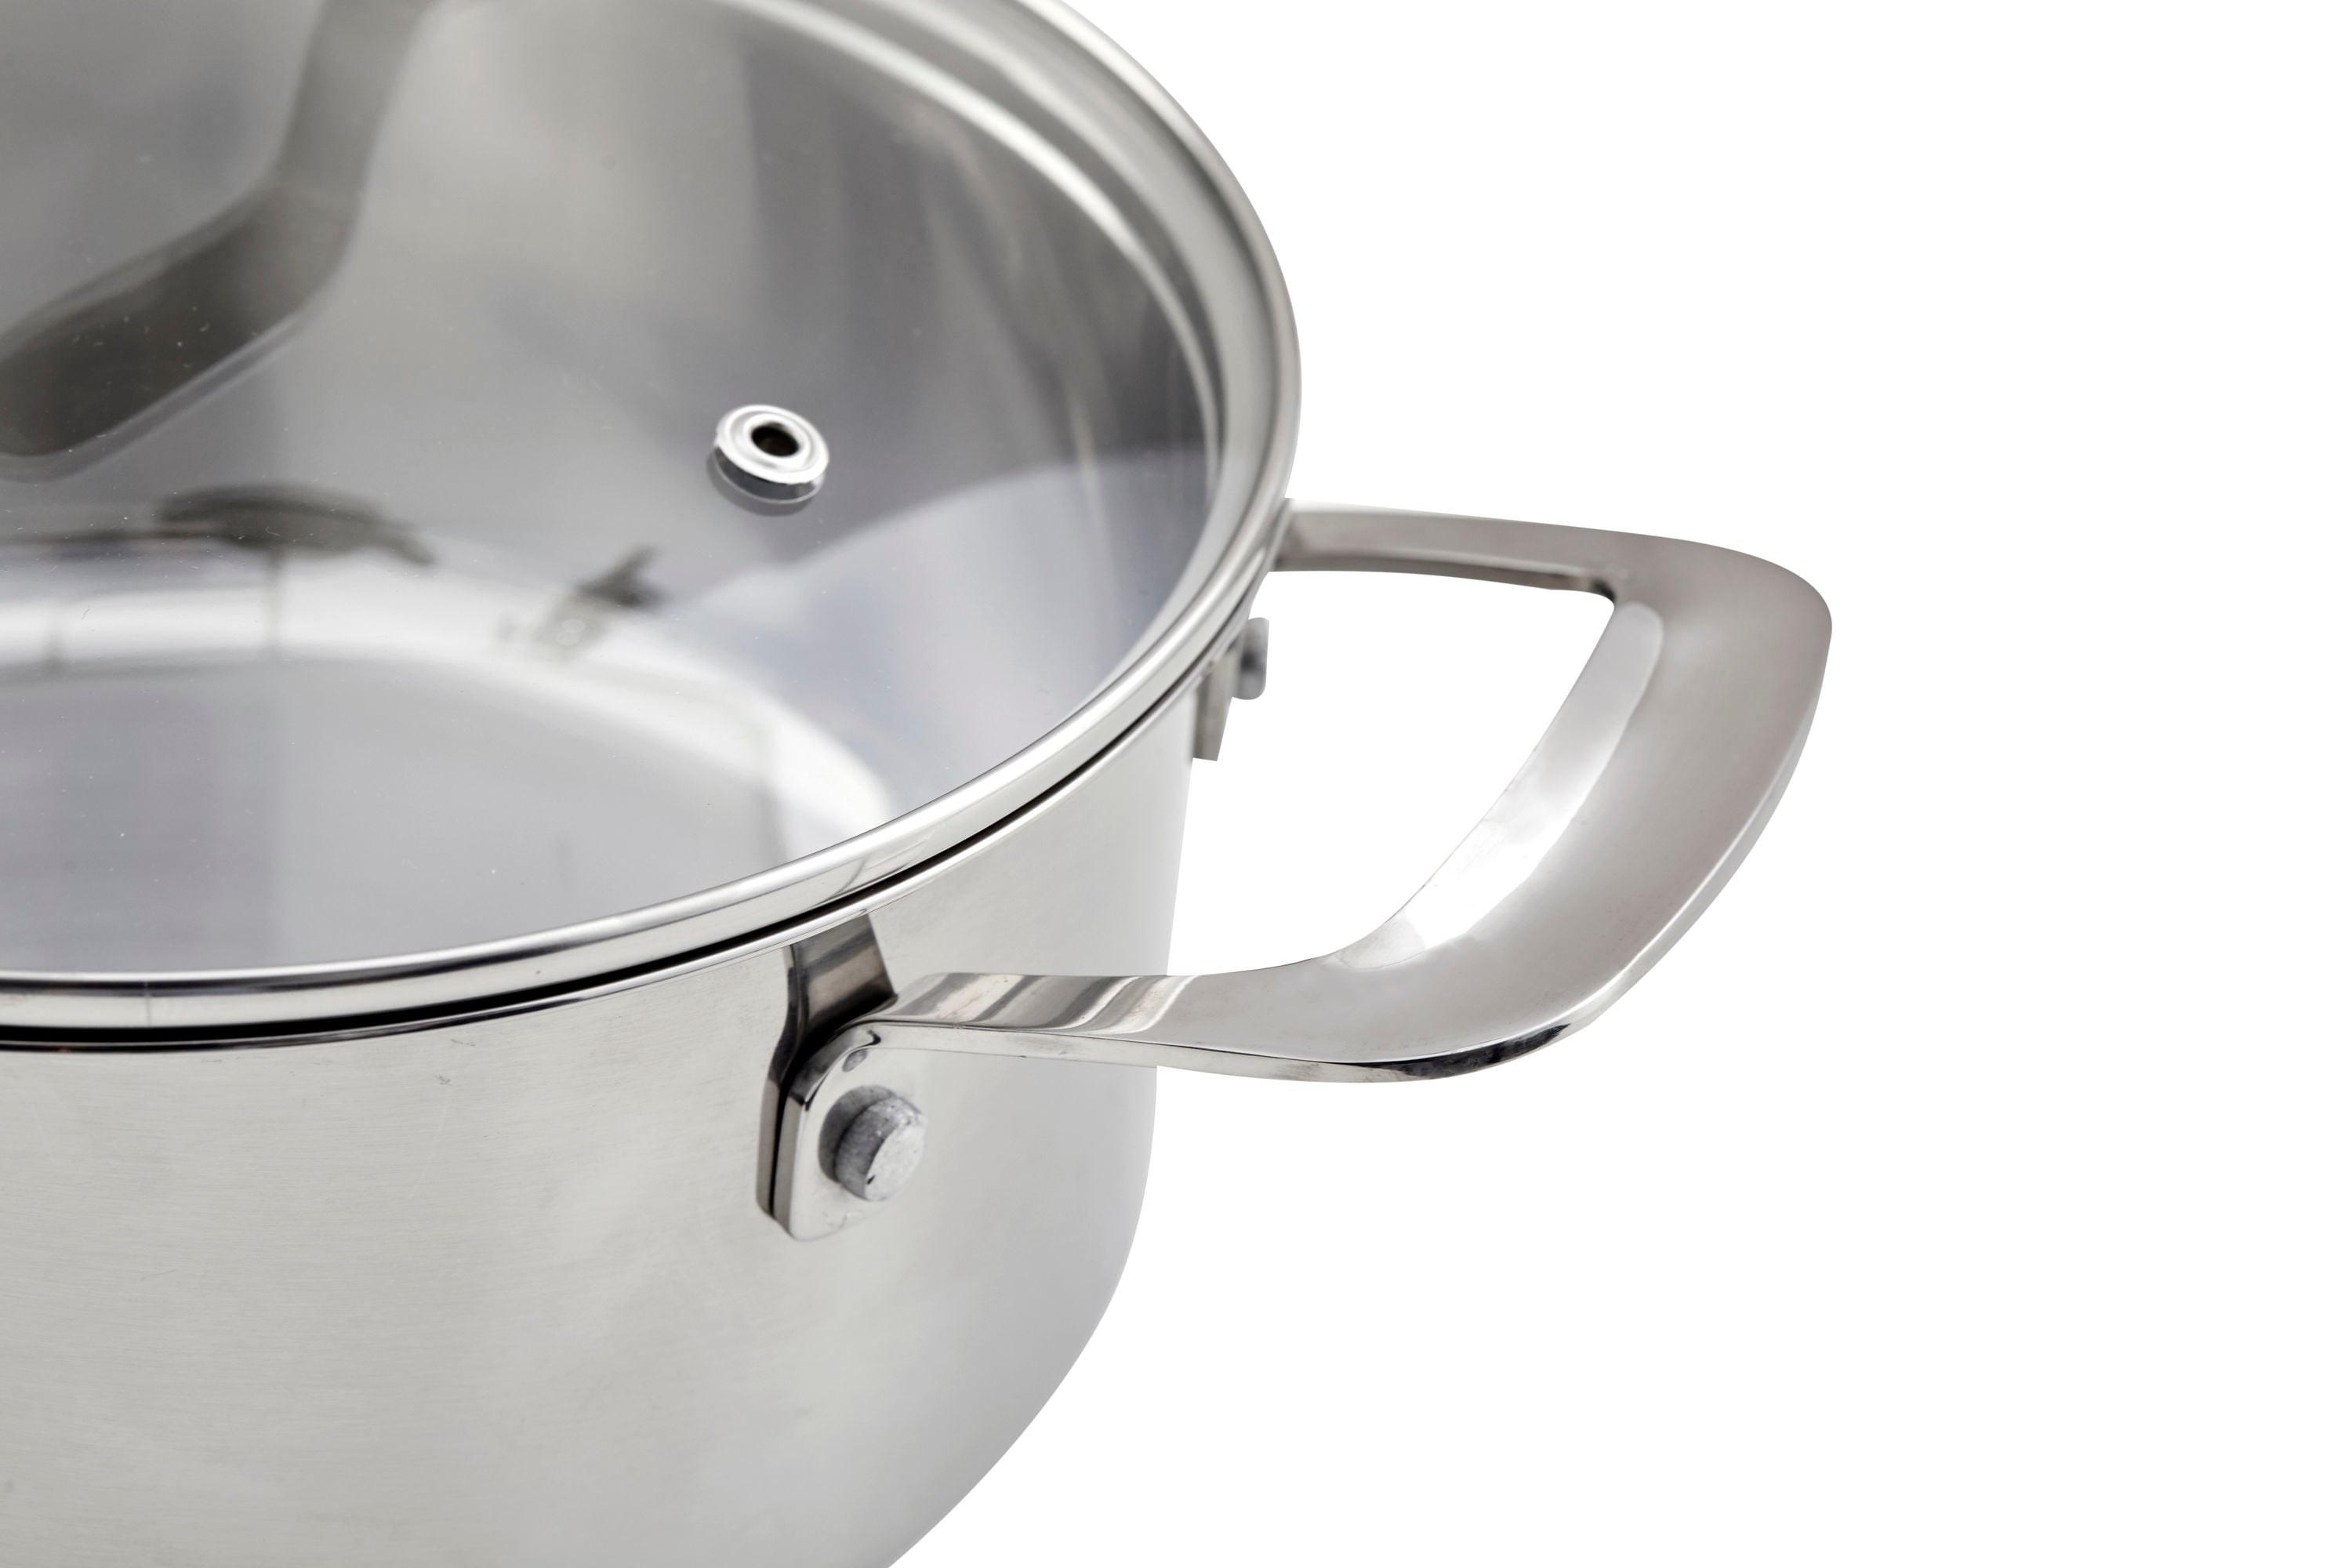 Davyline Cookware 3-Layer Base 8-Quart Stainless Steel Stock Pot in the  Cooking Pots department at